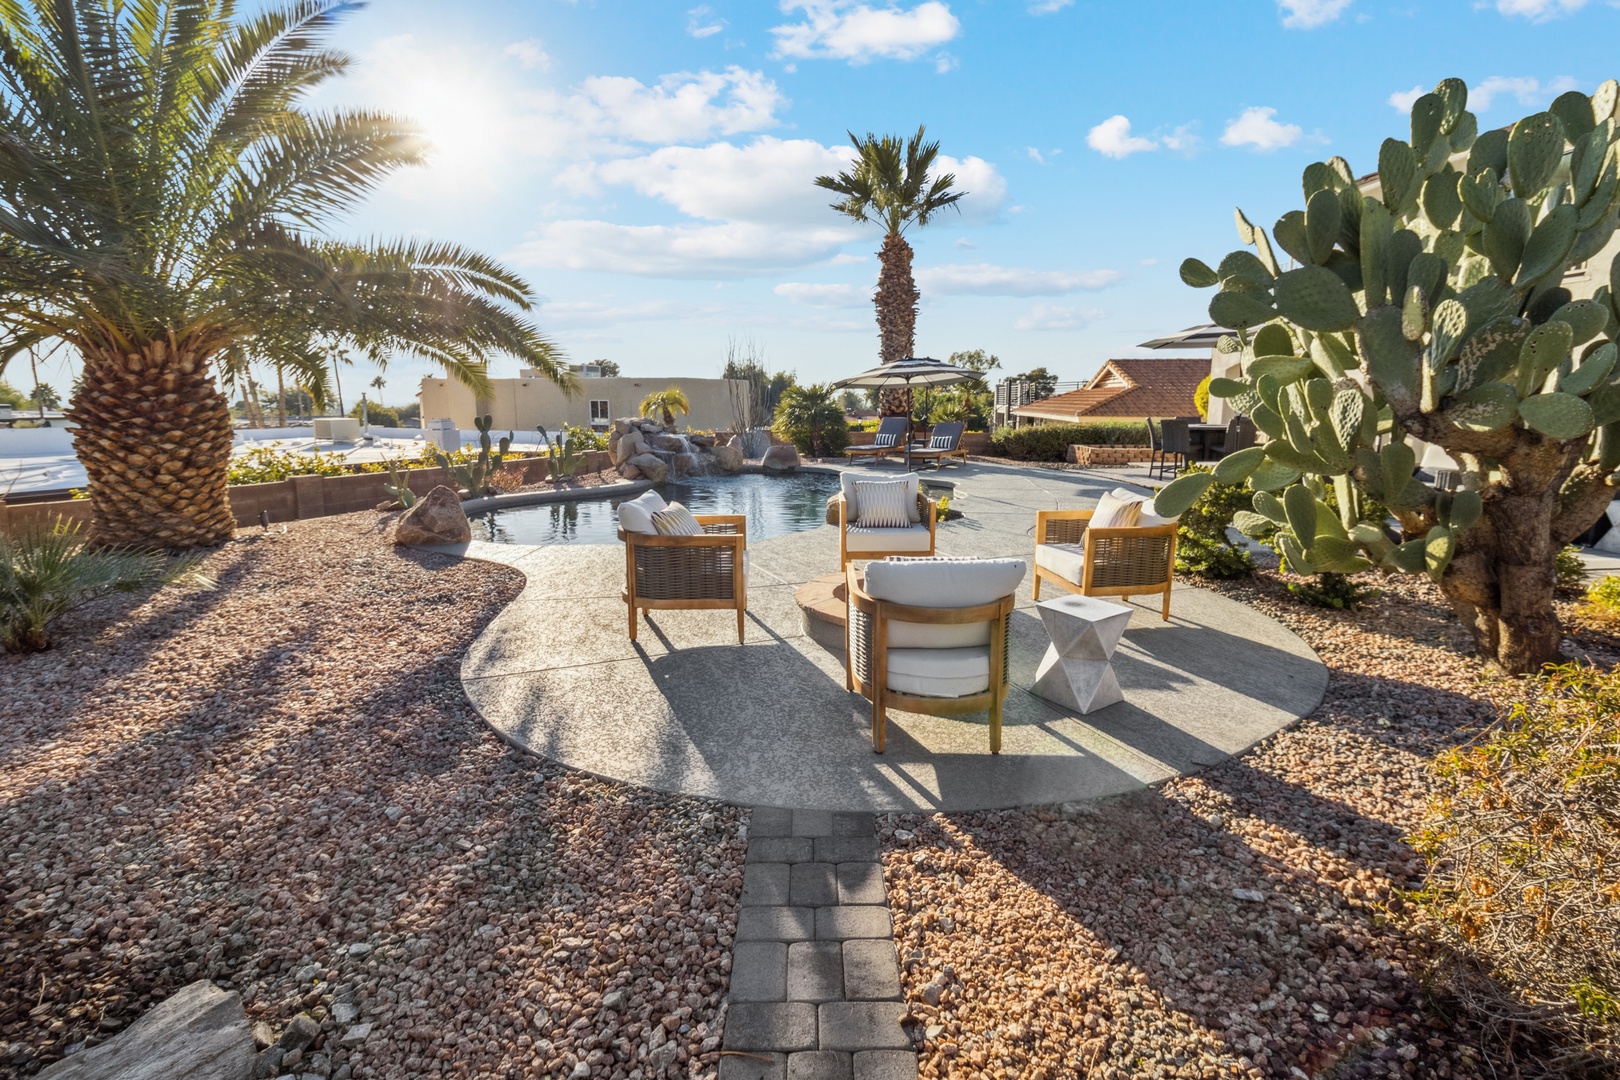 Phoenix Vacation Rentals, Majestic Mountain Views at Piestewa Peak Paradise - enjoy the pool with waterfall, which is great for swimming laps or relaxing on a hot summer day